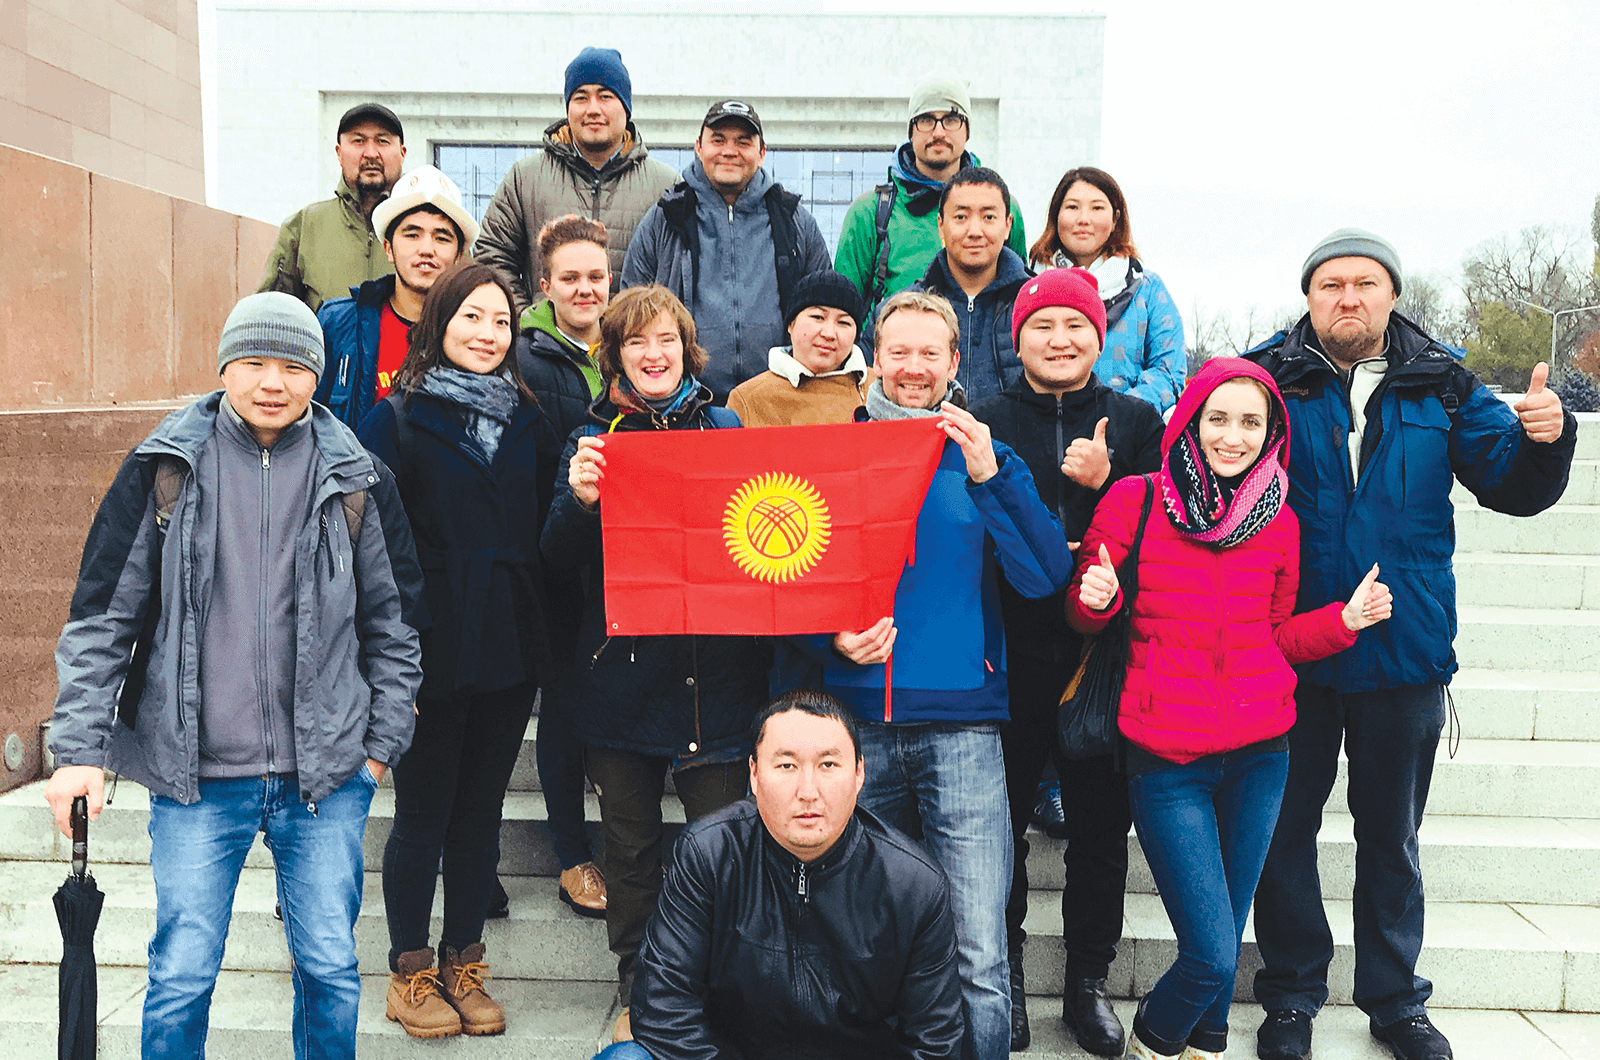 Instructors from the tour-guide training company EastguidesWest with a group of tourism students holding the flag of Kyrgyzstan in the capital city of Bishkek. Photo by EastguidesWest